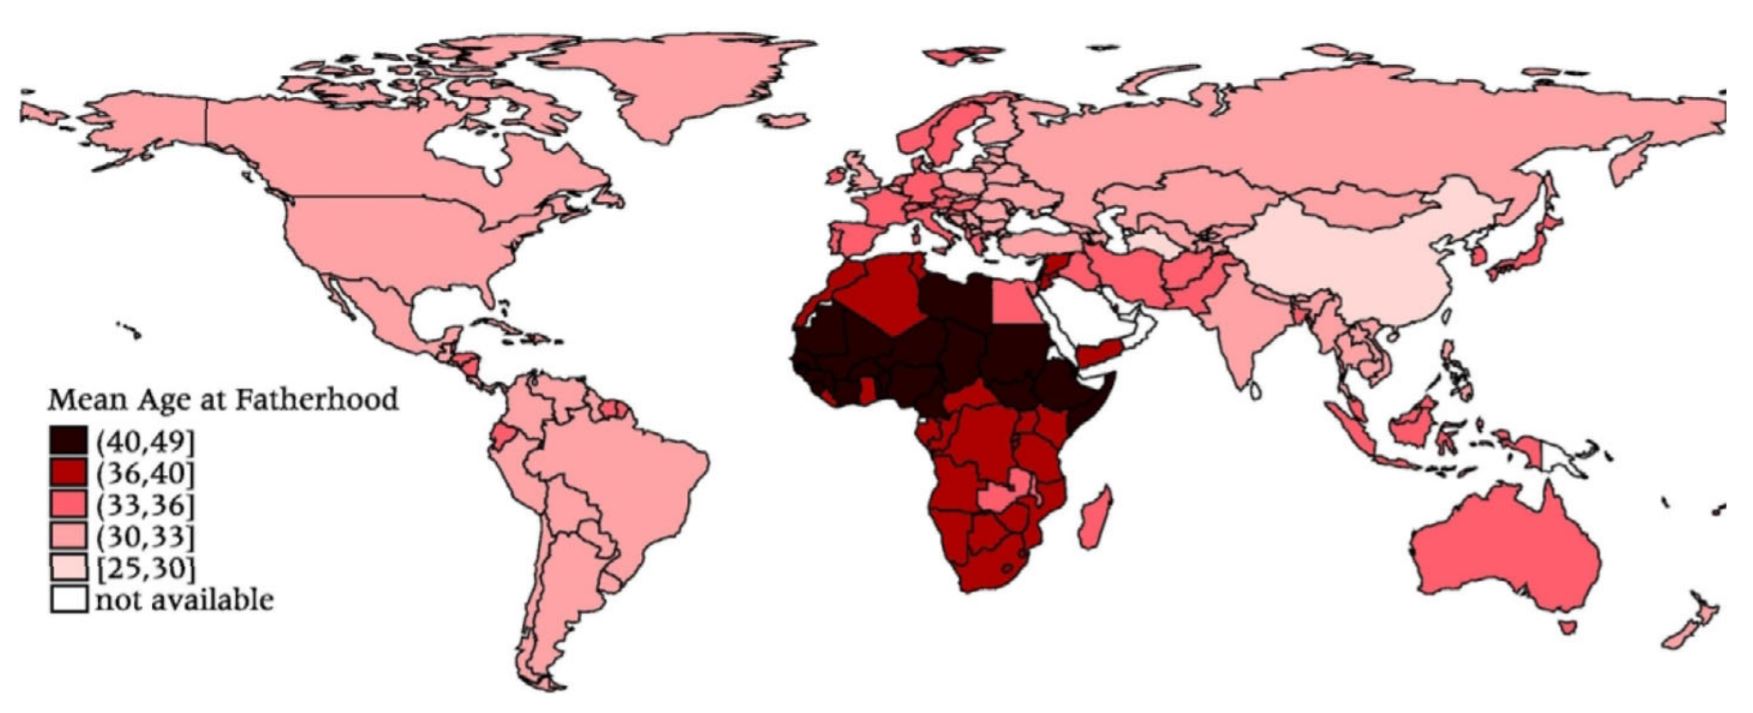 This is map of the world. Countries are shaded darker if the mean age at fatherhood is higher. Countries with the highest mean age of fatherhood are in Saharan Africa, where the average father is over forty years old. Parts of North Africa and most of Sub-Saharan Africa are next oldest. The Middle East, Western Europe, and Australia have older fathers than most of the countries in North and South America. China has young fathers.